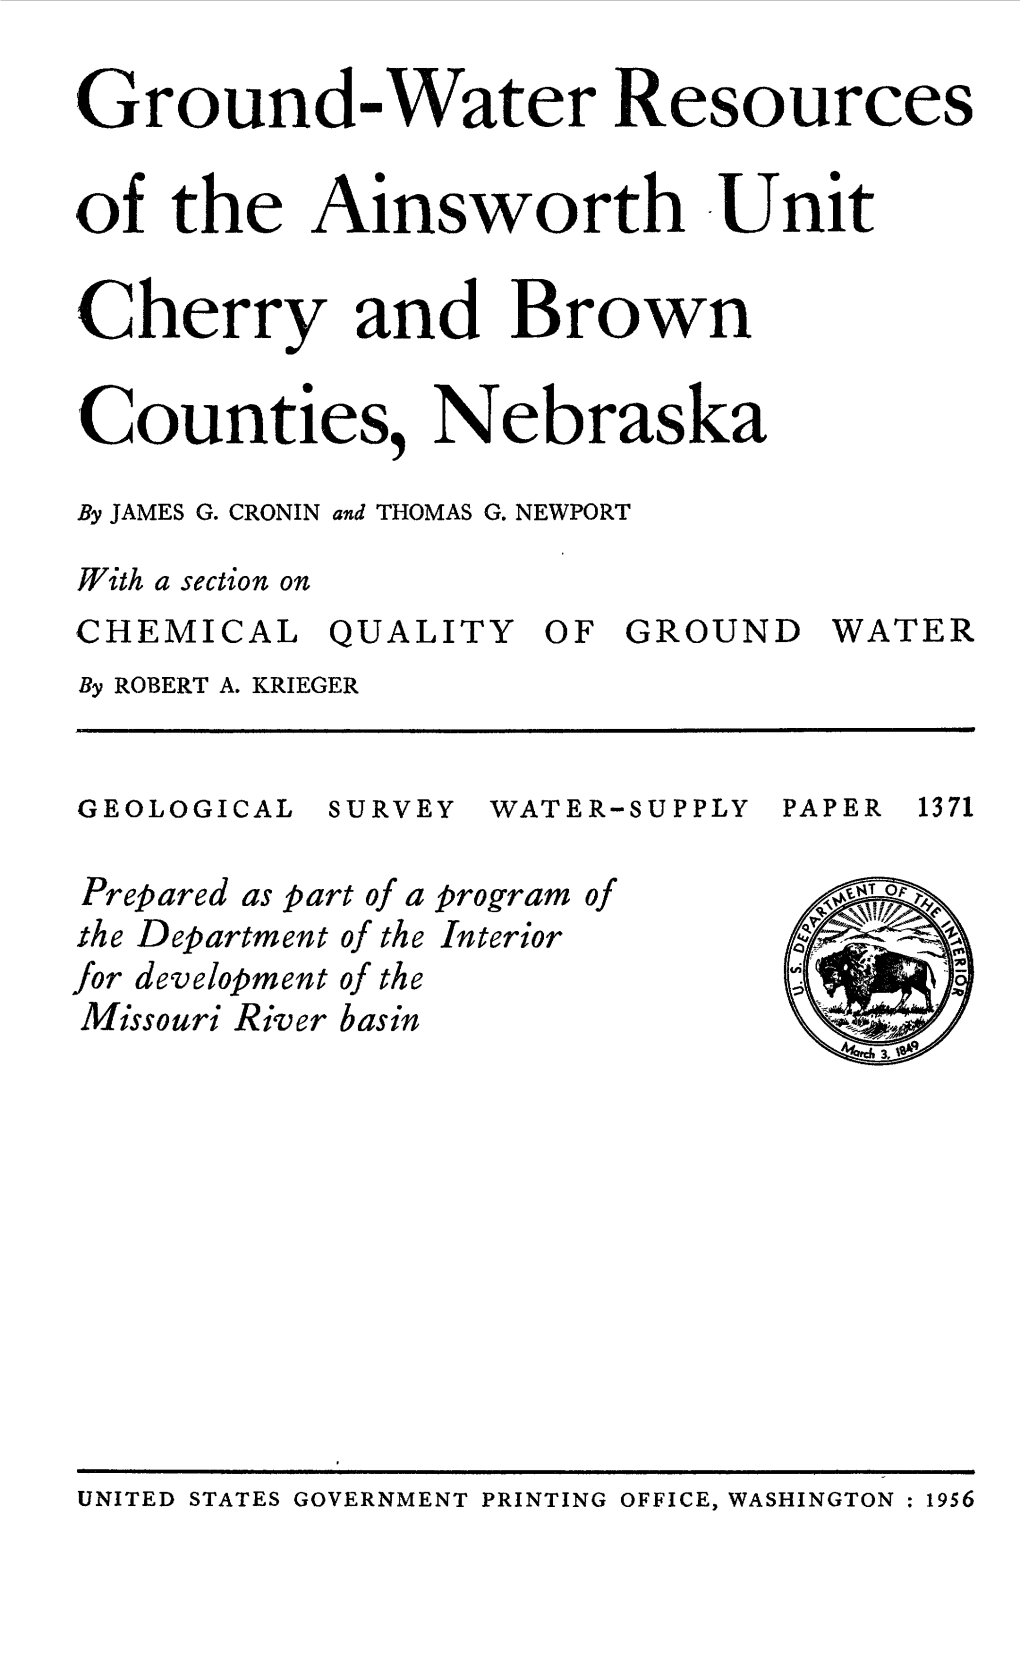 Ground-Water Resources of the Ainsworth Unit Cherry and Brown Counties, Nebraska